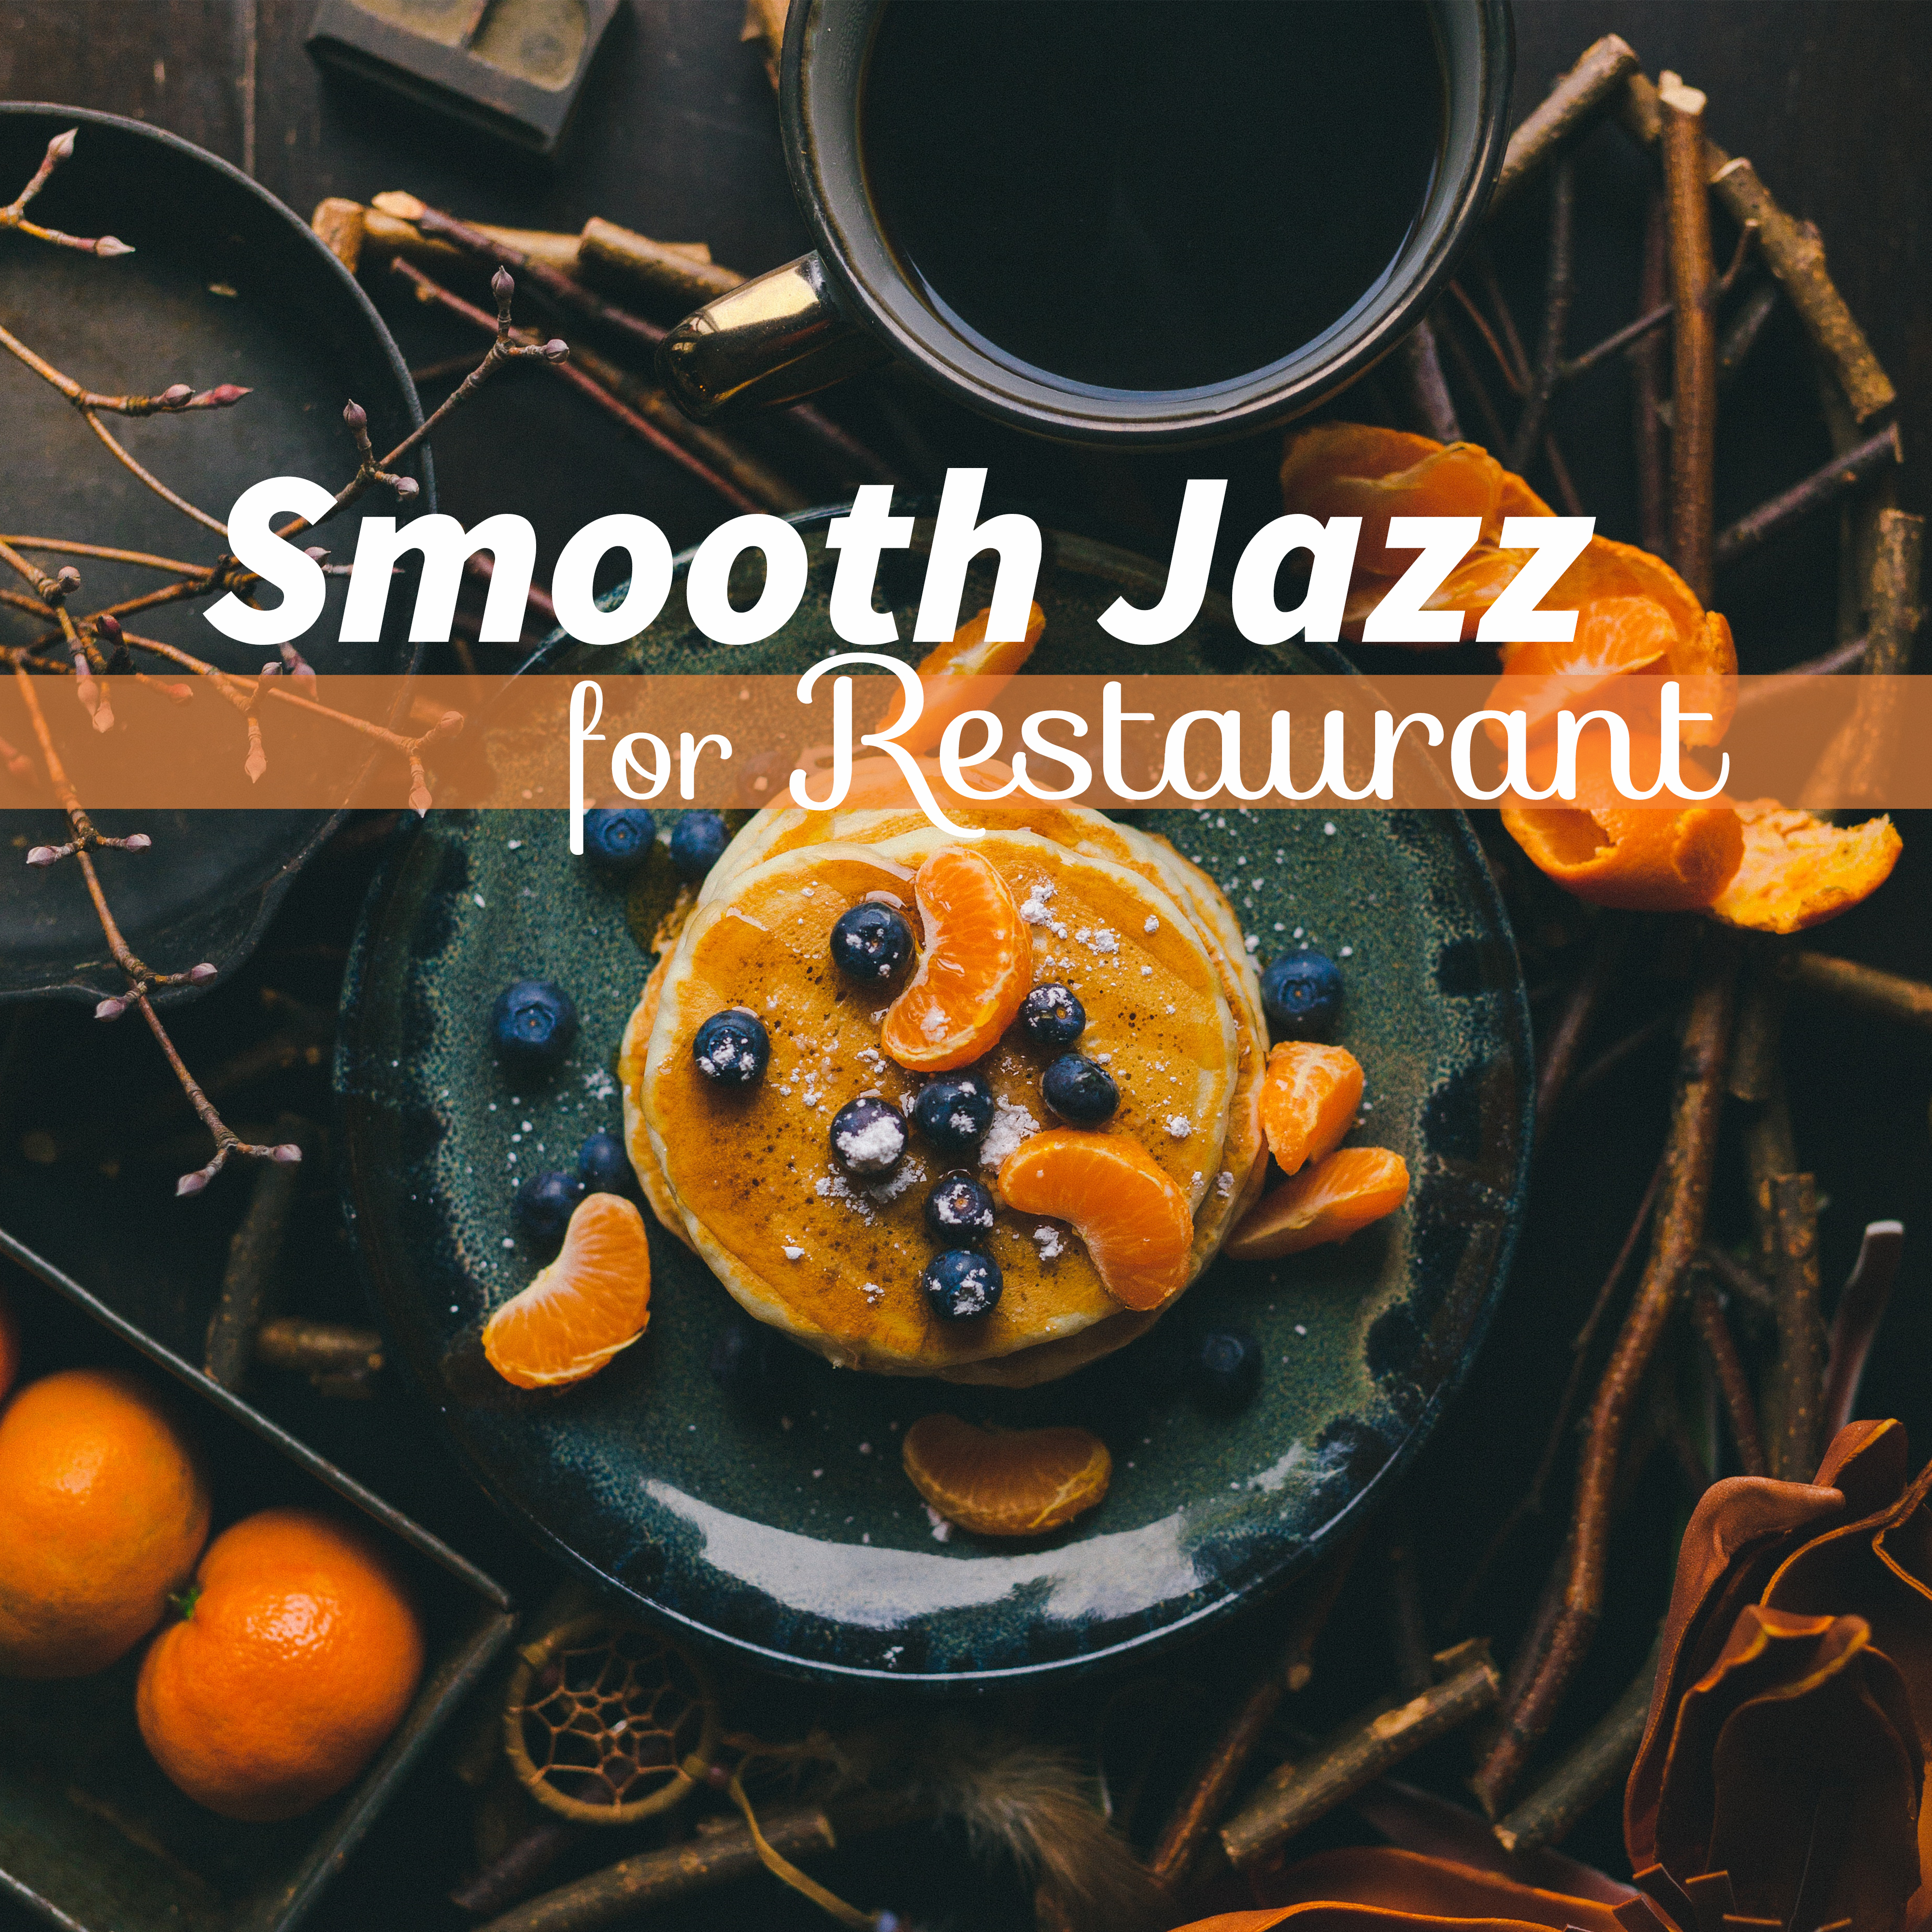 Smooth Jazz for Restaurant  Peaceful Melodies for Restaurant, Chilled Jazz Music, Soothing Piano Bar